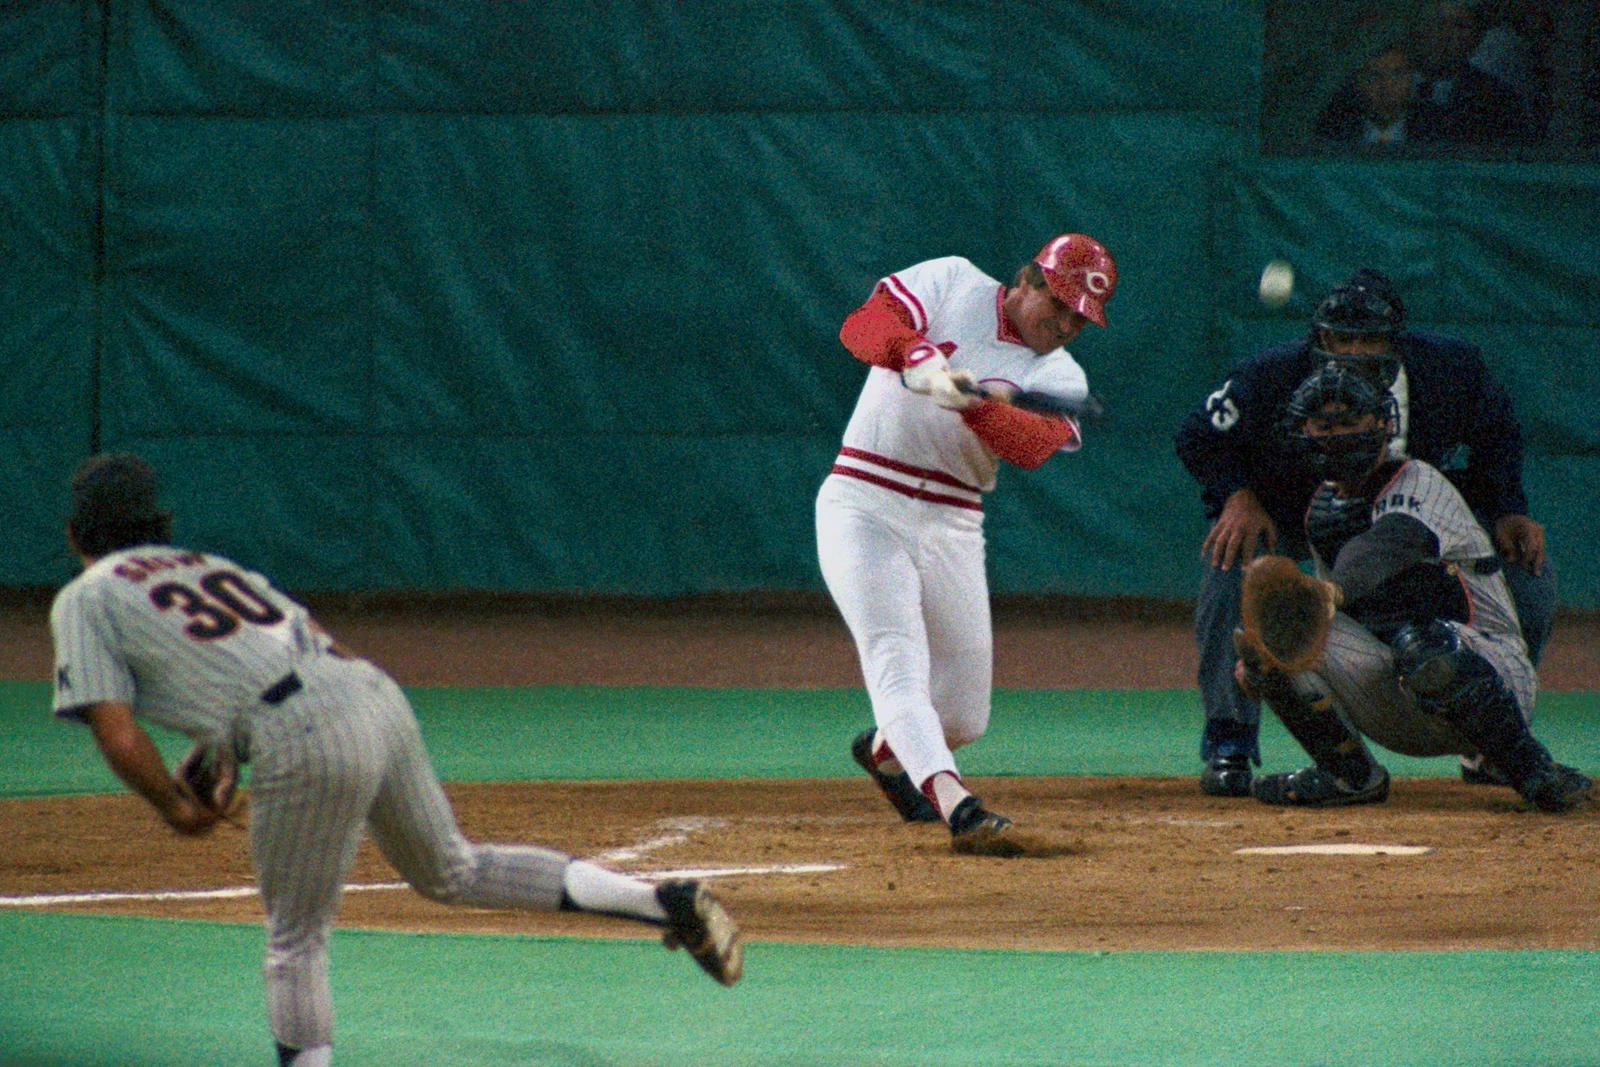 Why Nobody's Sure Which Day Pete Rose Broke Baseball's Hit Record